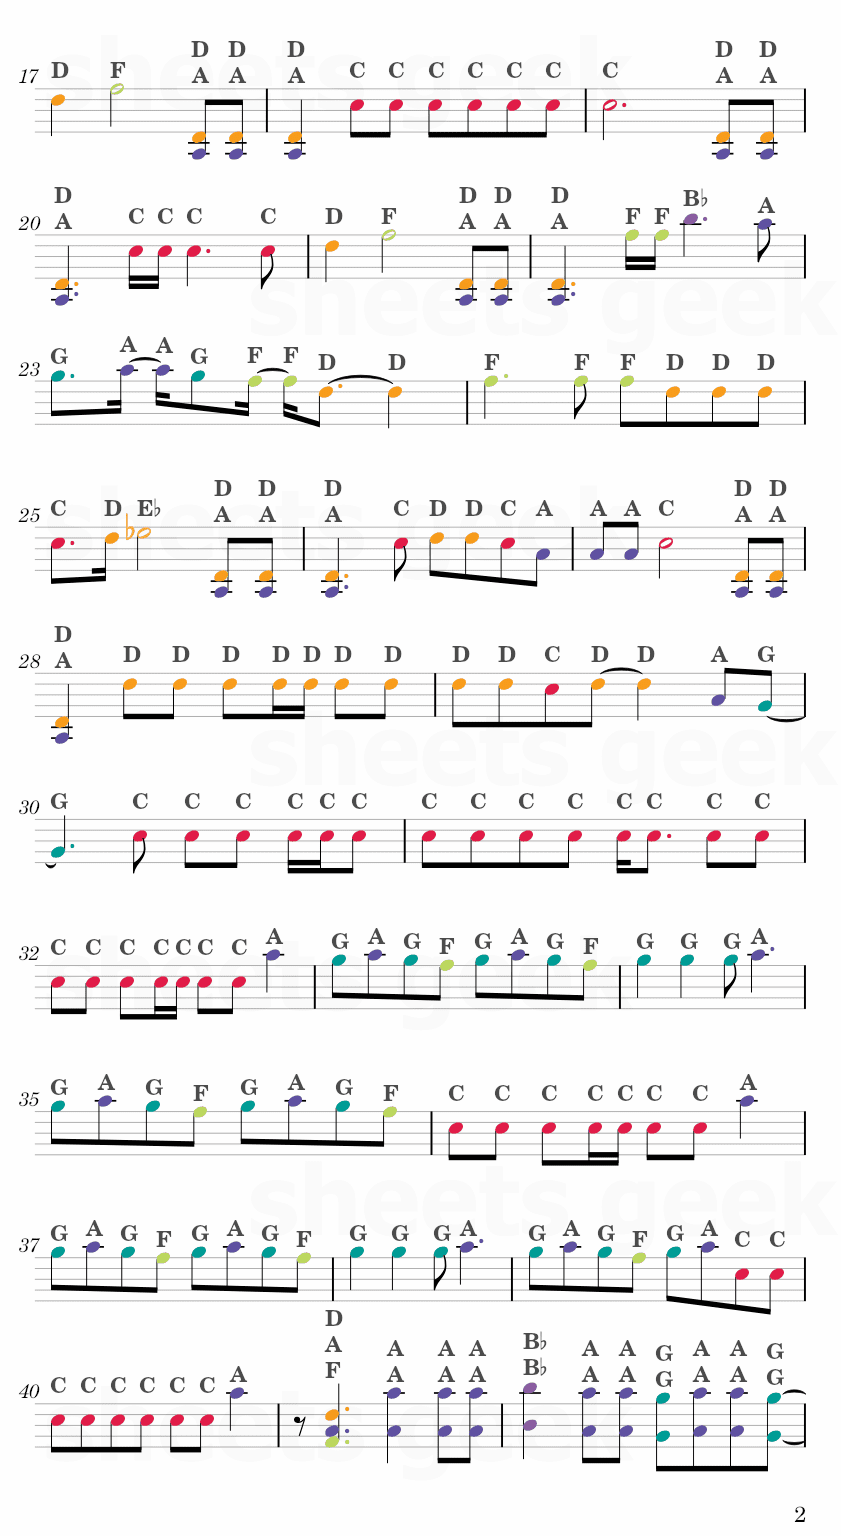 Sticker - NCT 127 Easy Sheet Music Free for piano, keyboard, flute, violin, sax, cello page 2